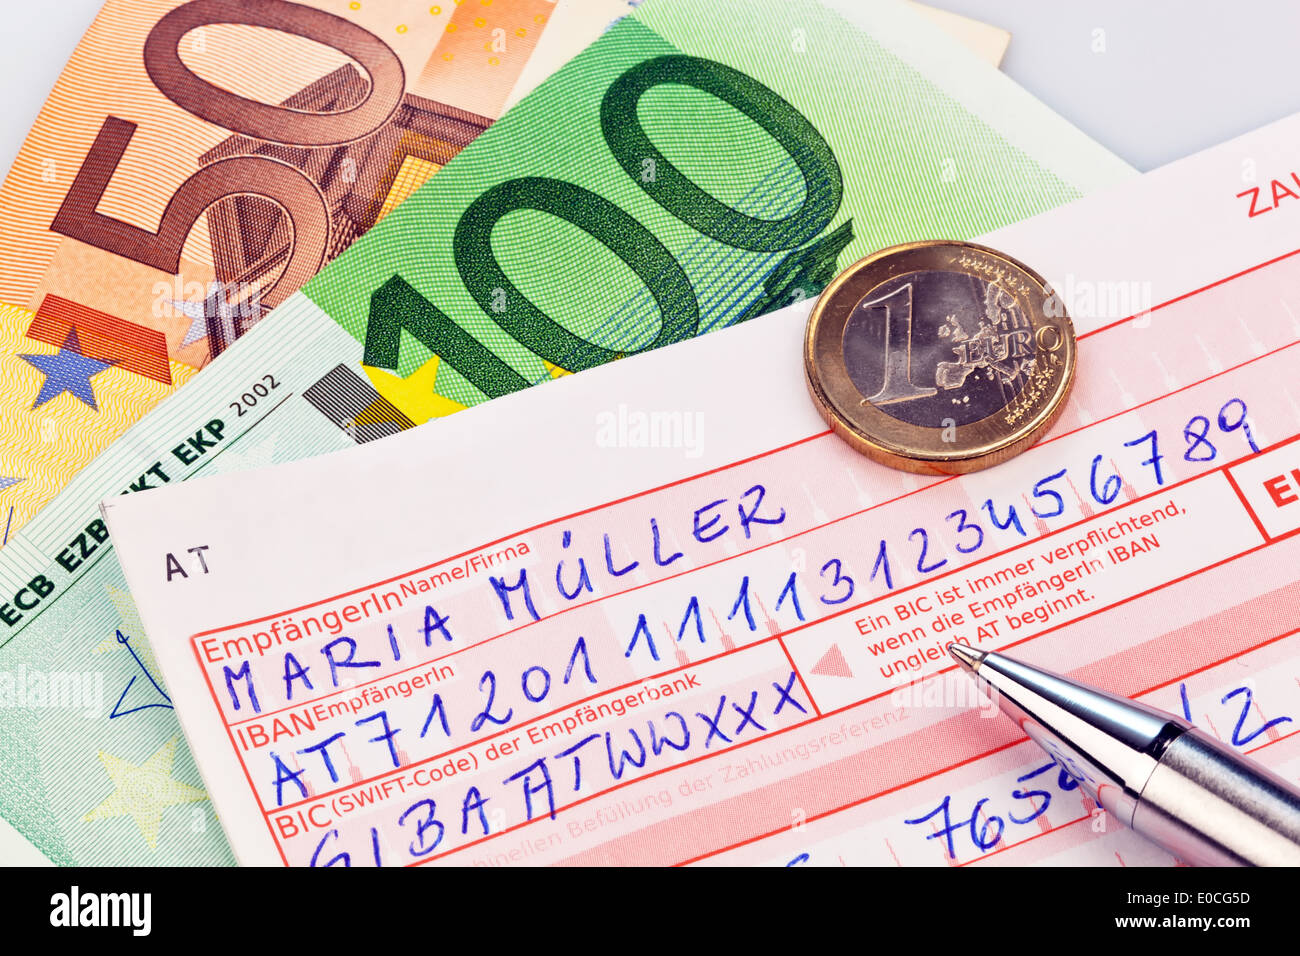 A form for money transfer with number IBAN and code BIC in Germany Stock  Photo - Alamy